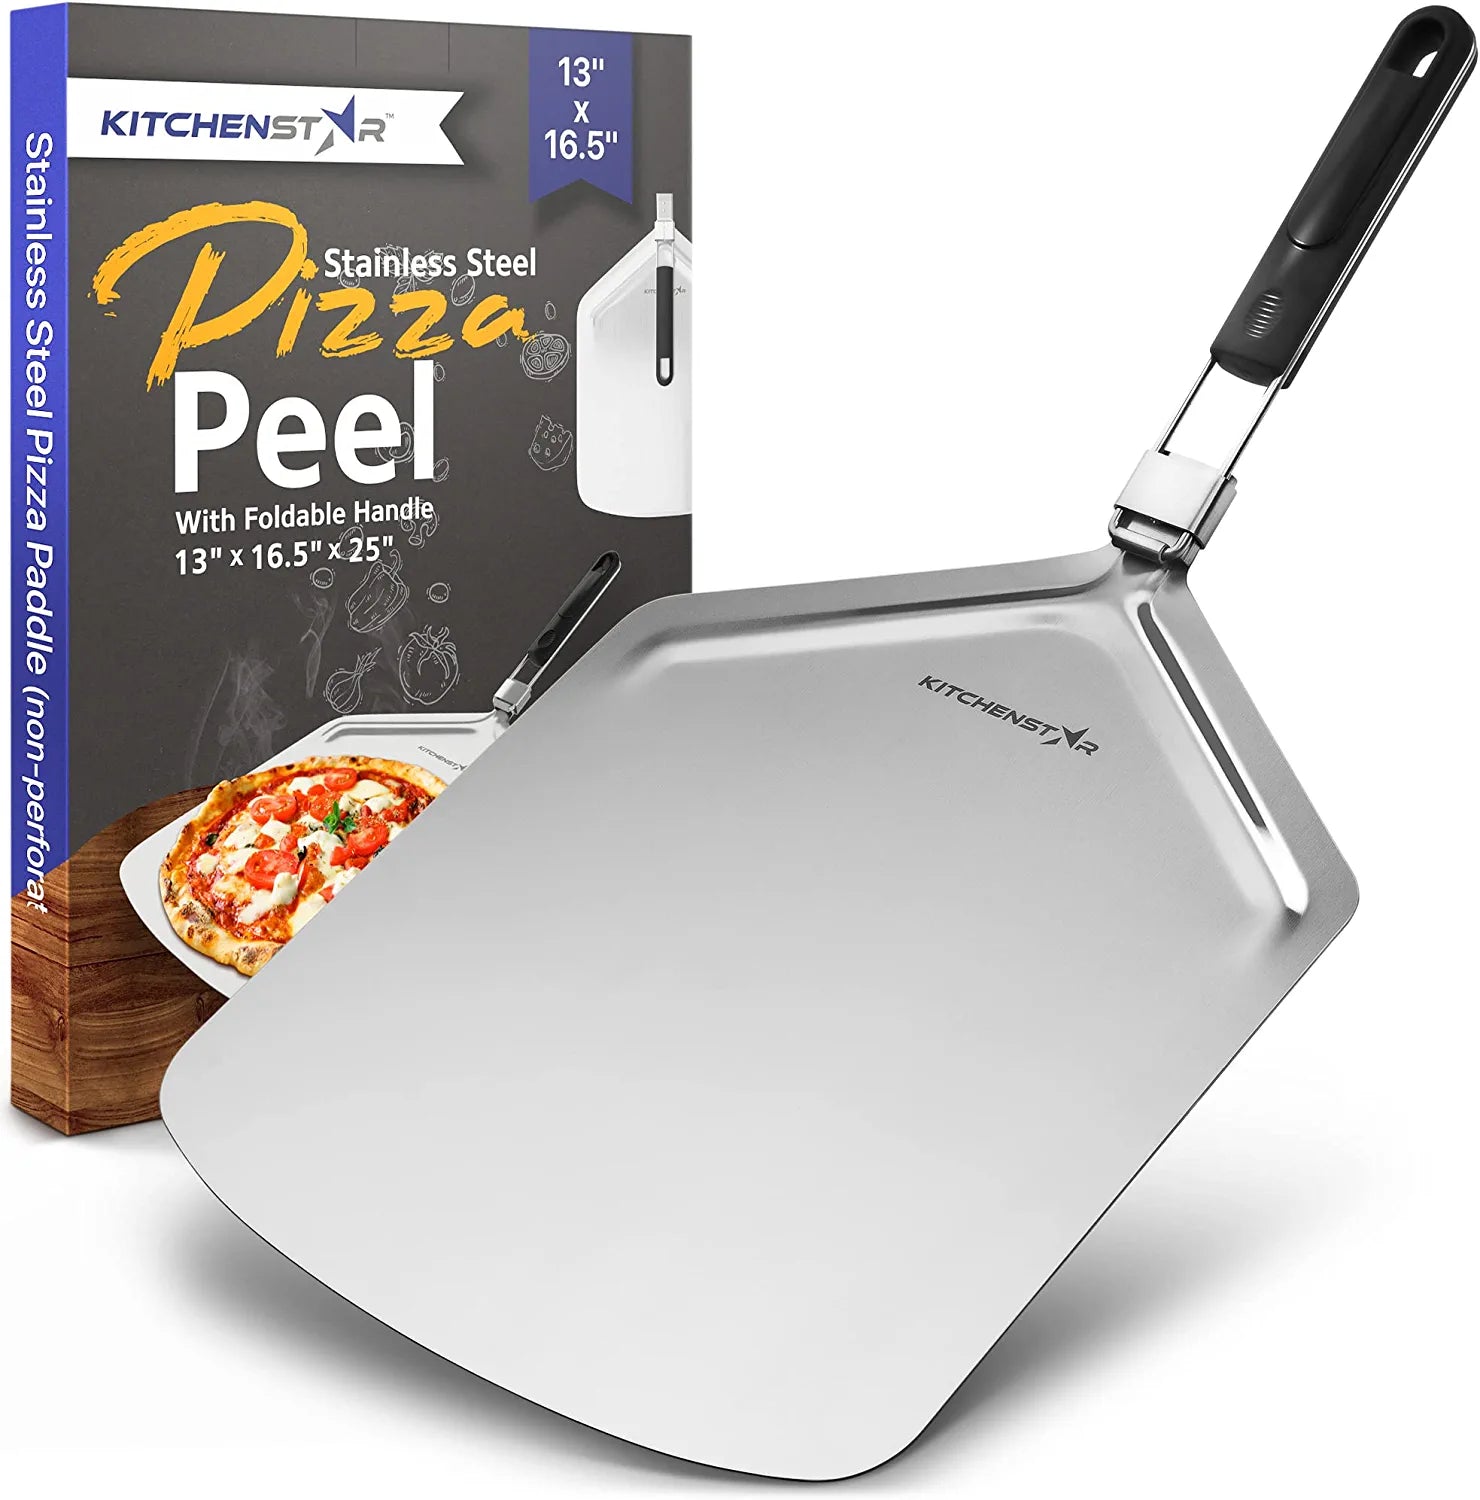 KitchenStar Metal Pizza Peel 9.5 inch - Stainless Steel Paddle Spatula